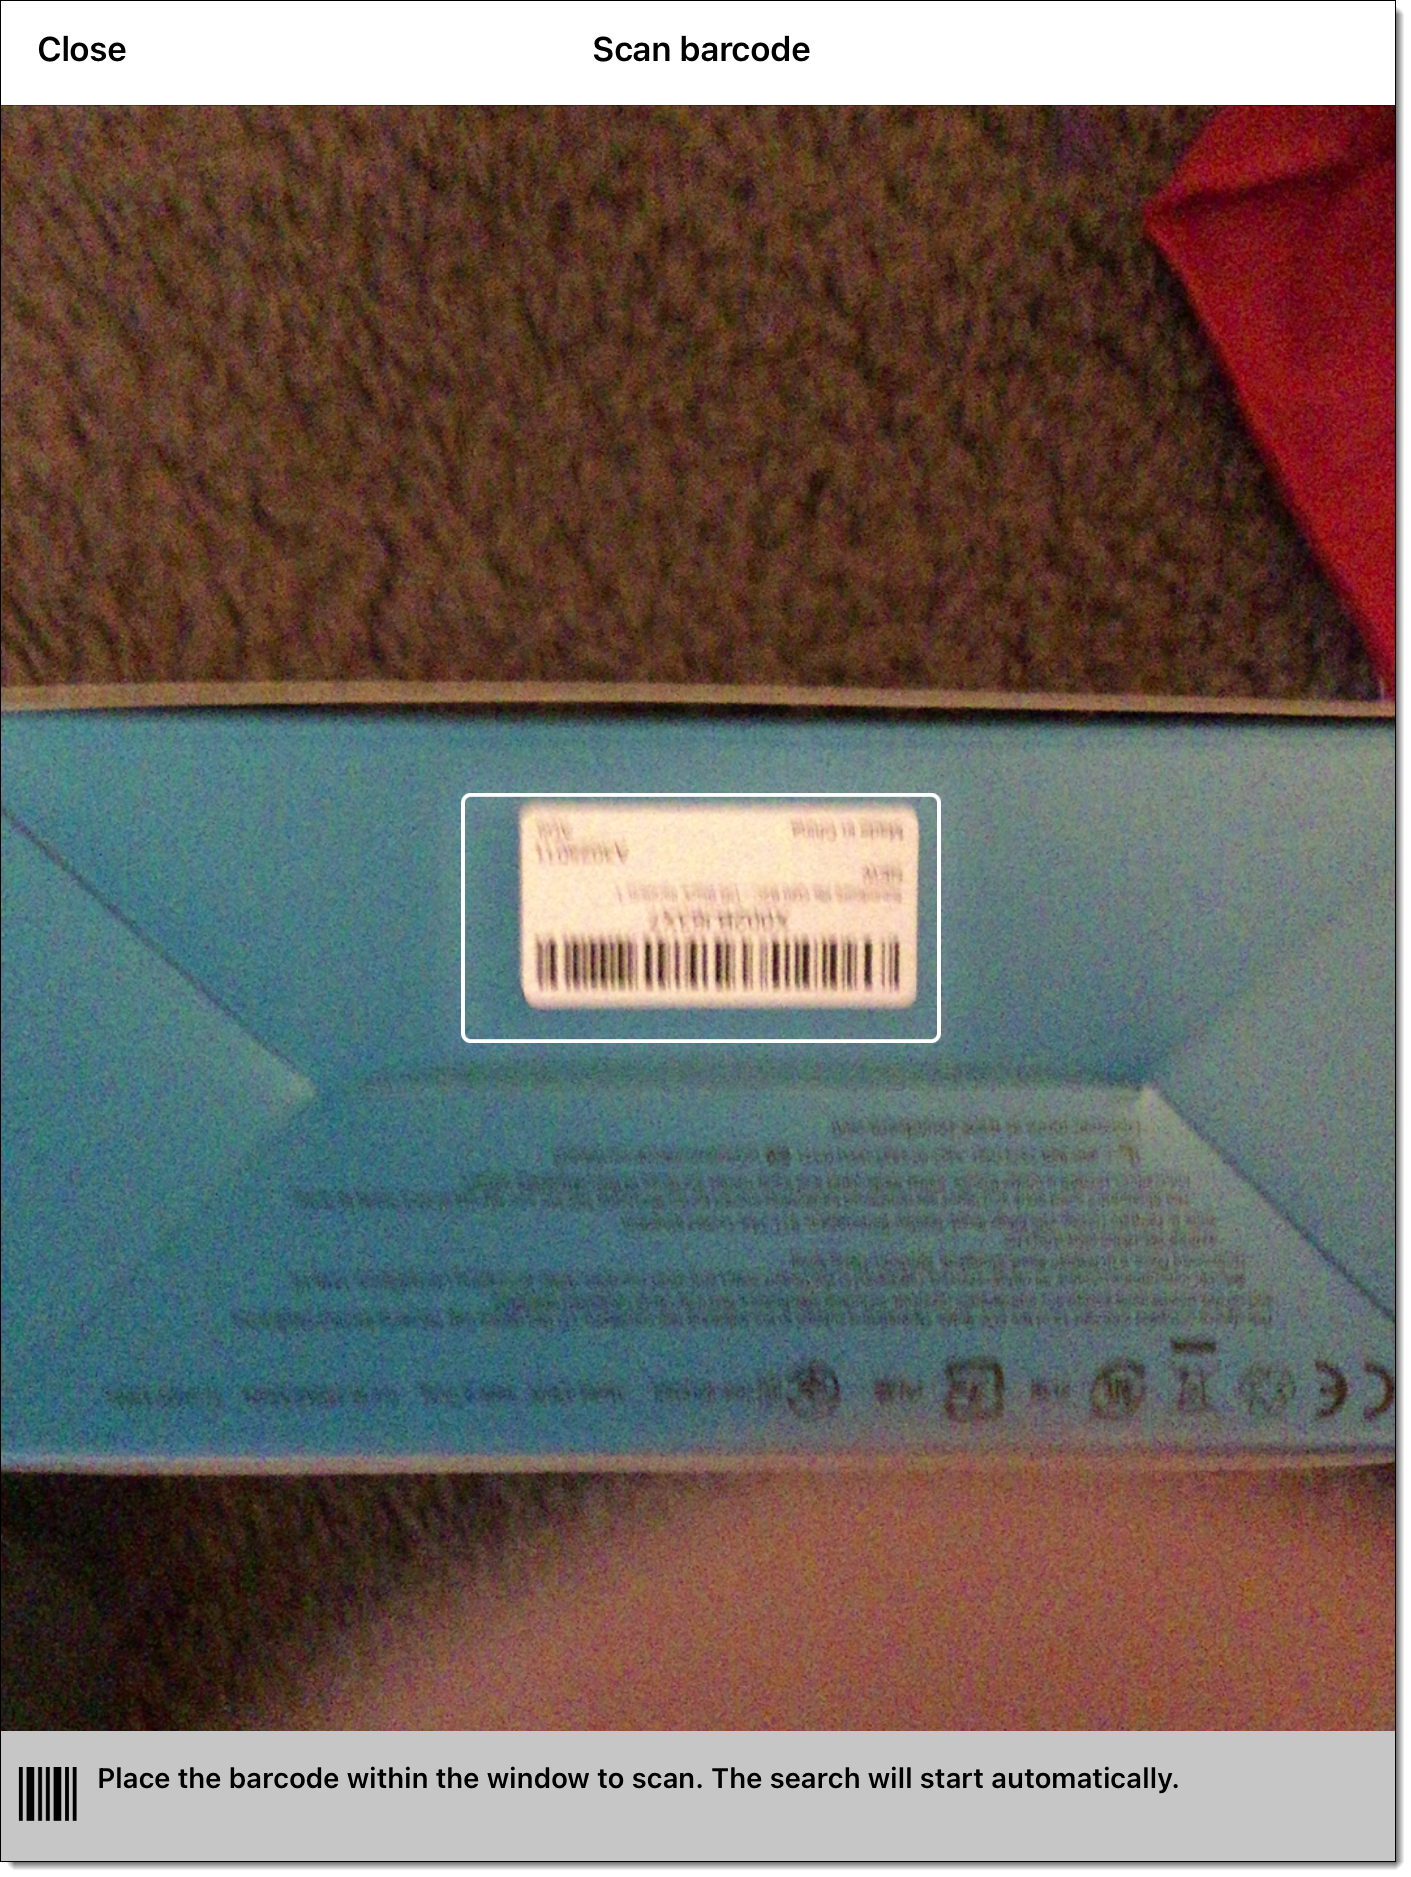 Example of the barcode scanner using the camera with a box on screen for the barcode